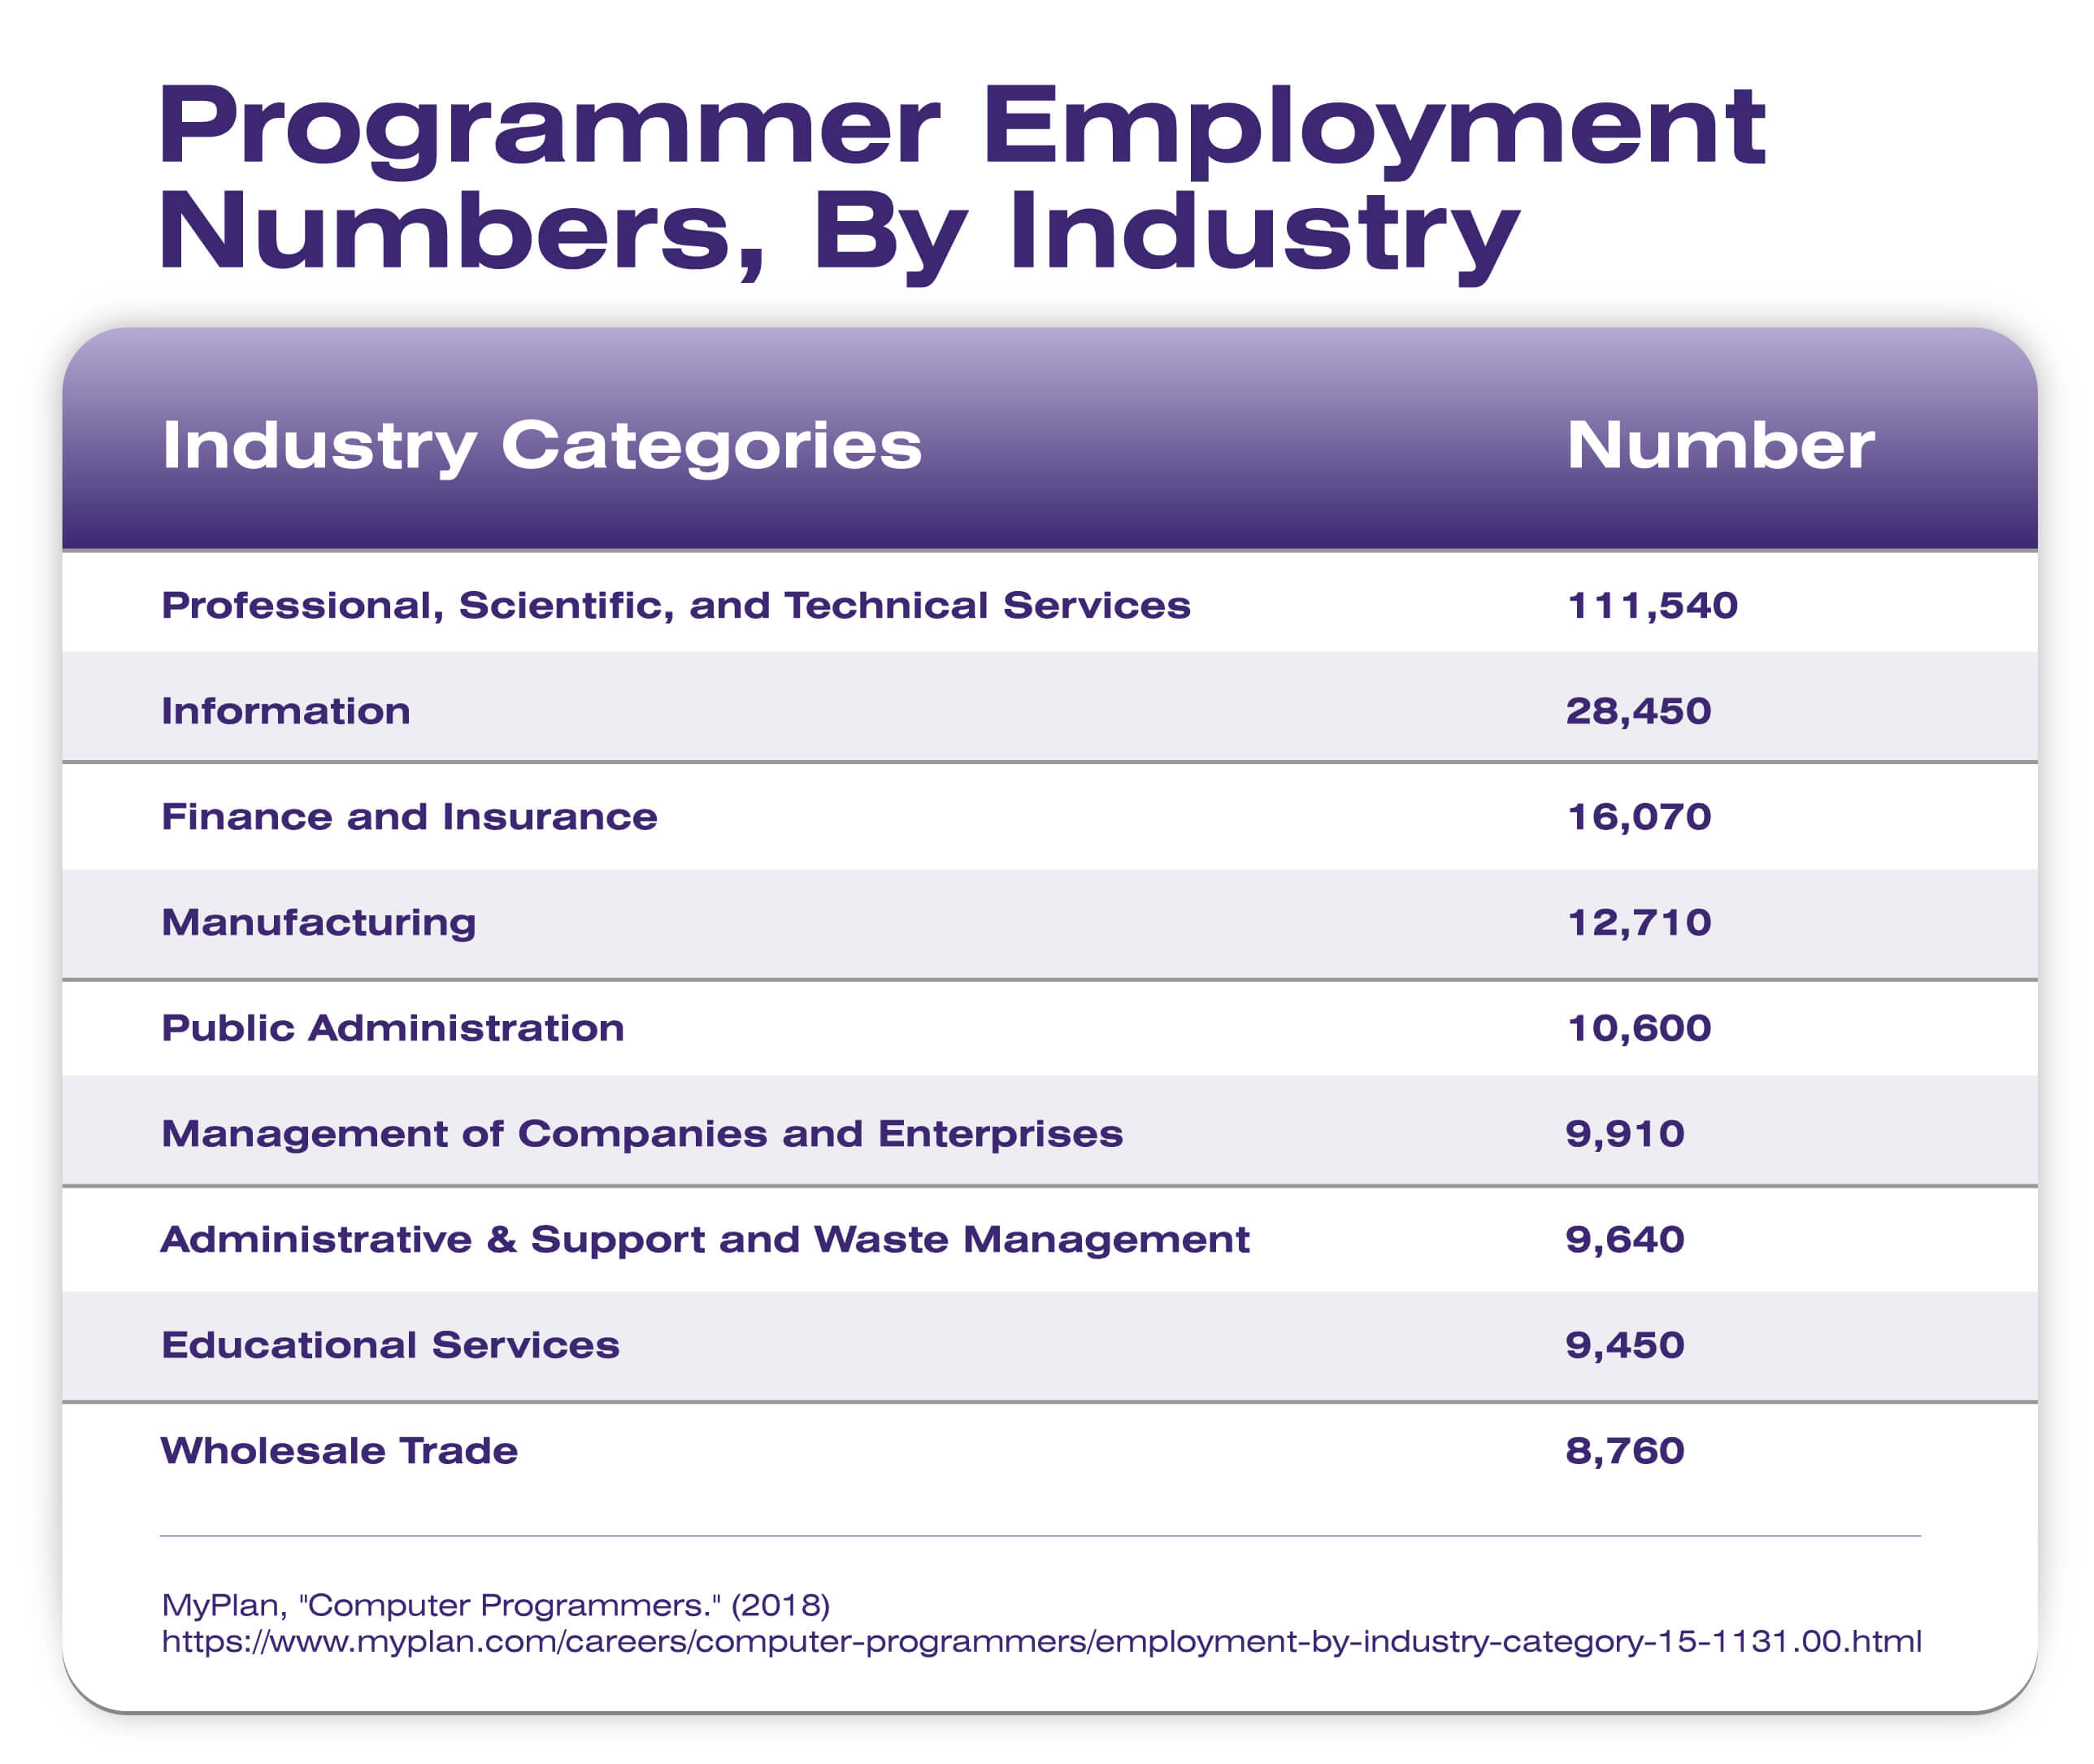 Graph showing programmer employment numbers by industry